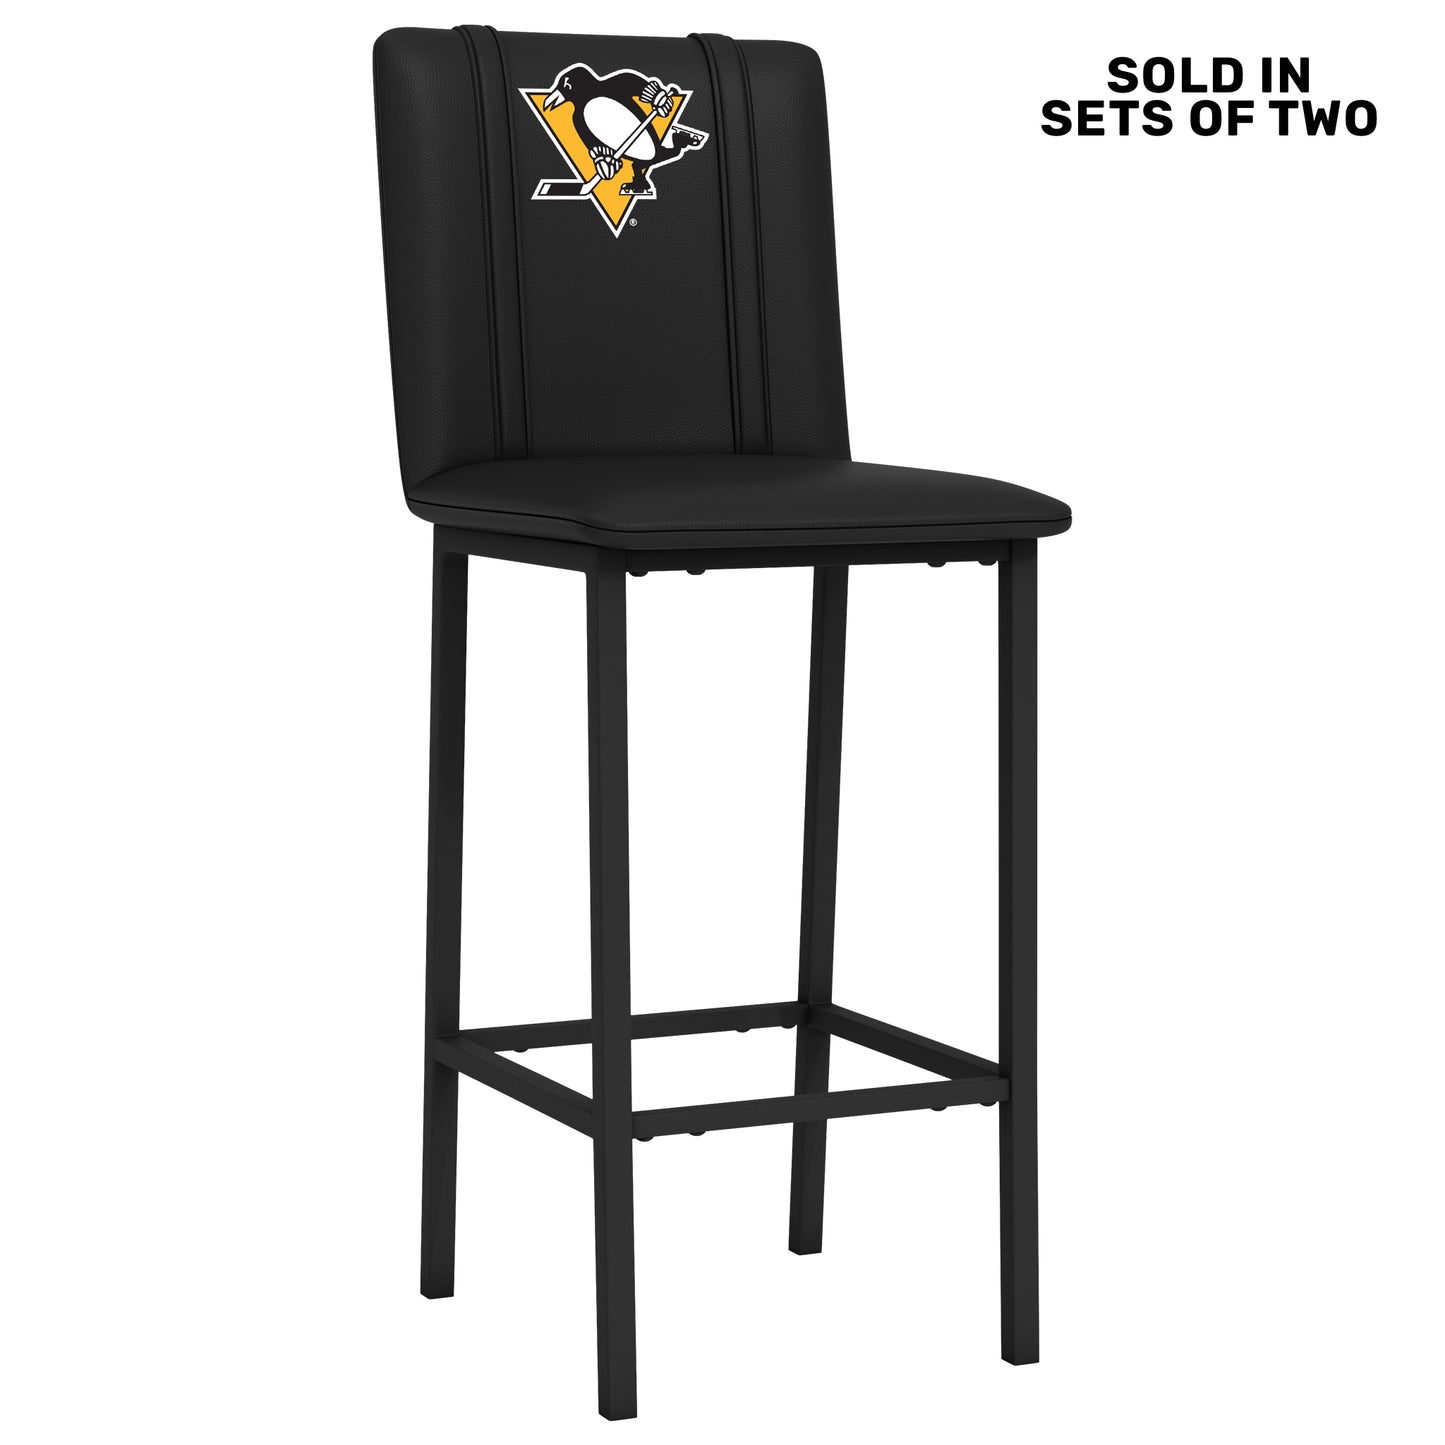 Bar Stool 500 with Pittsburgh Penguins Logo Set of 2